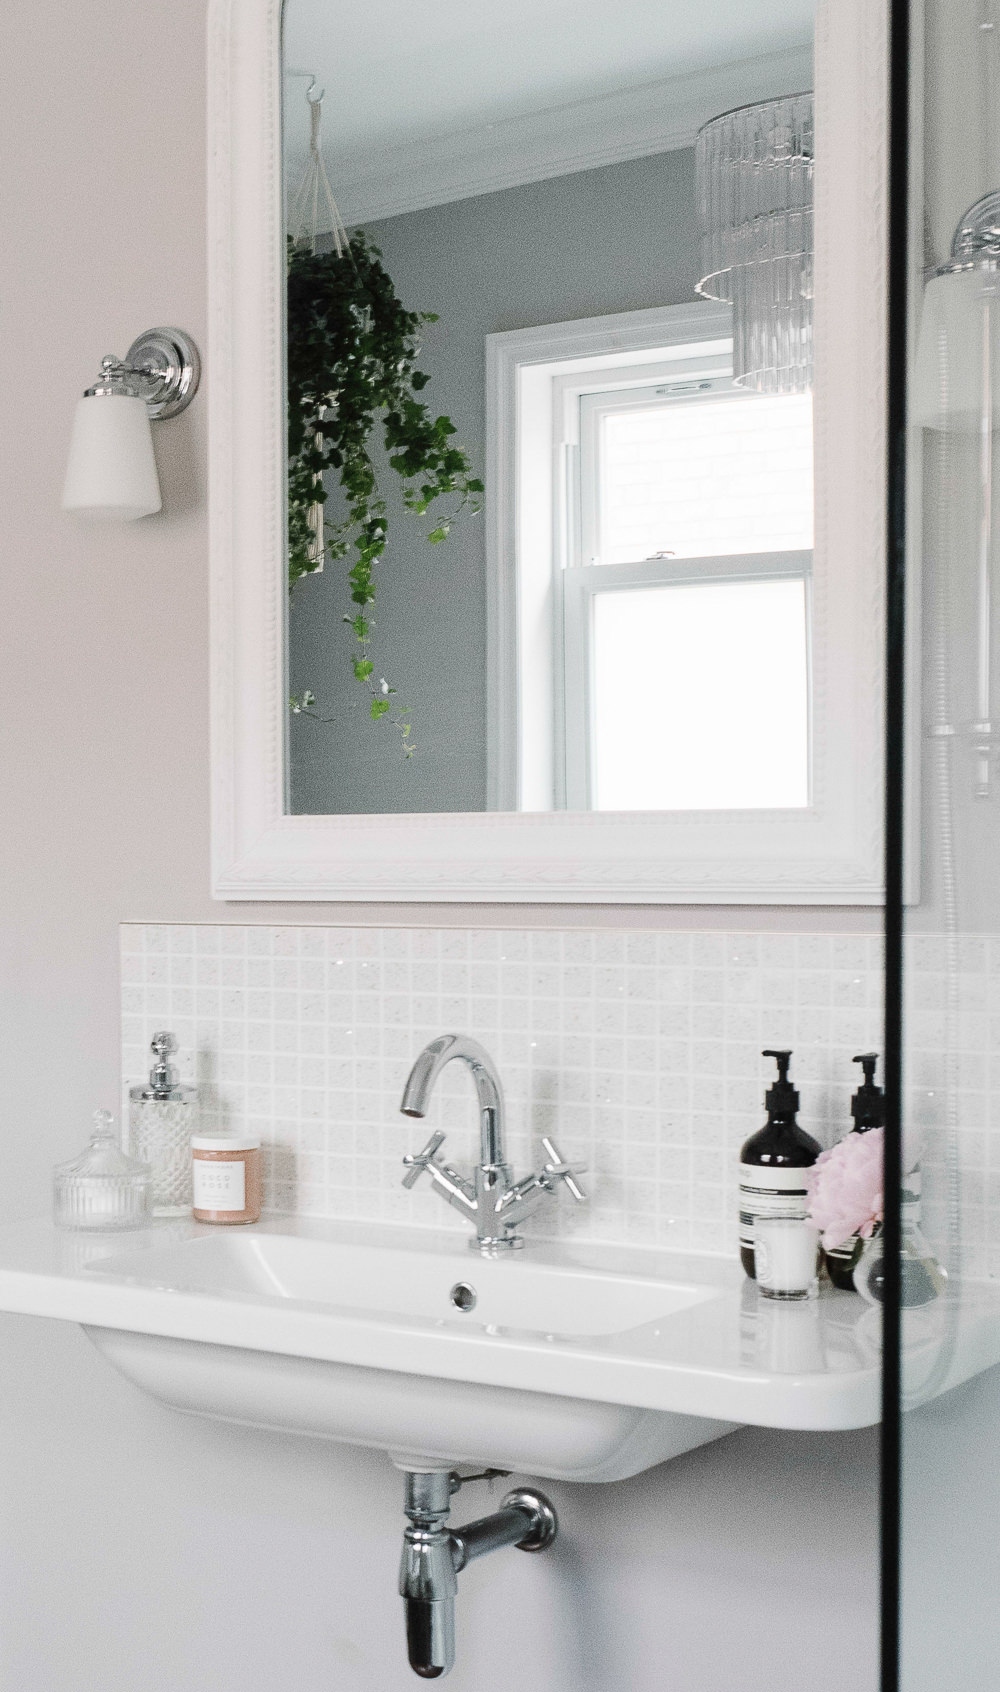 White mirror over wall mounted basin